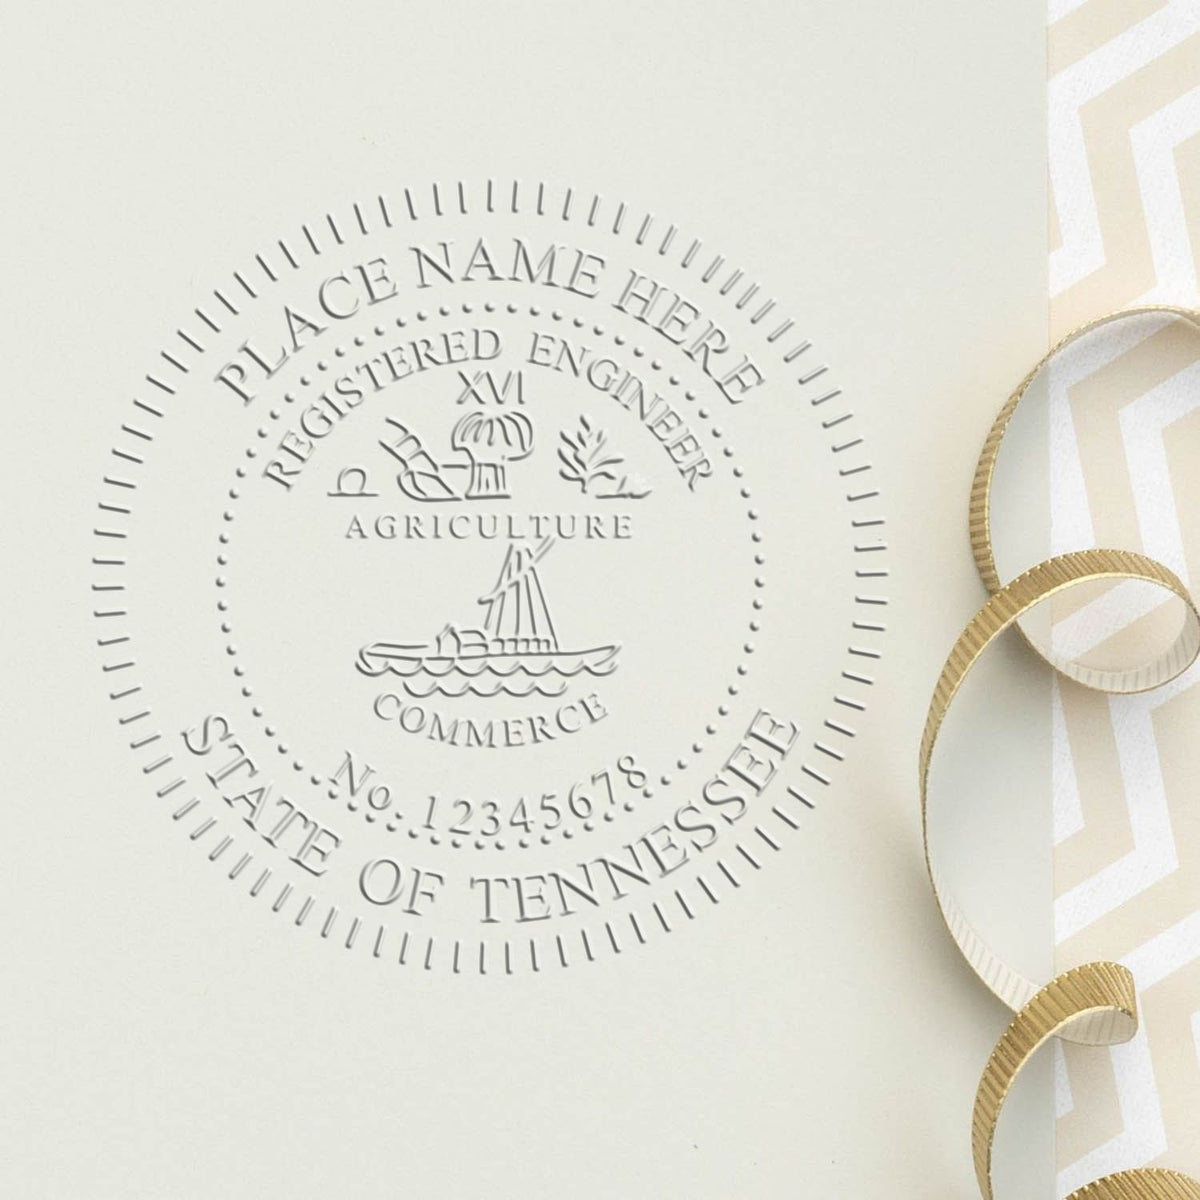 A stamped impression of the Soft Tennessee Professional Engineer Seal in this stylish lifestyle photo, setting the tone for a unique and personalized product.